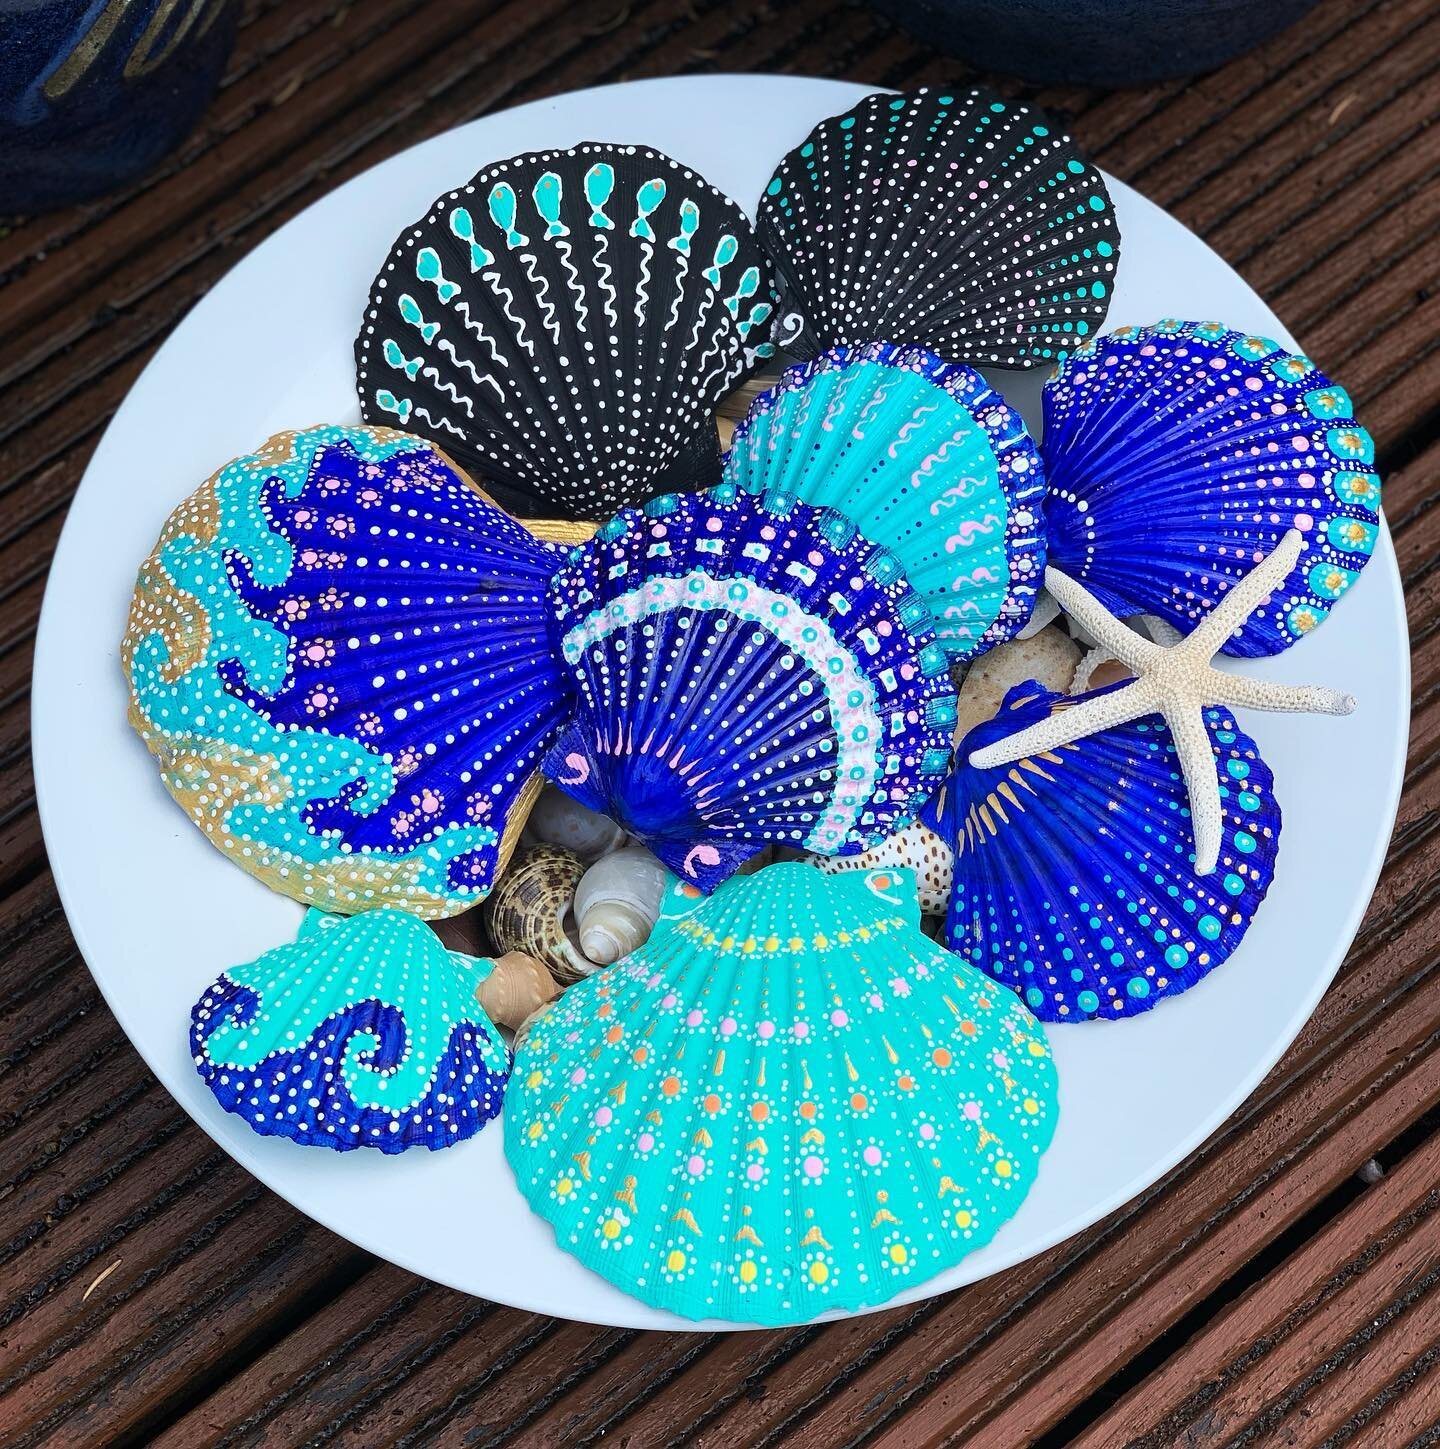 My favourite colours on my favourite shells ! Happy Friday everyone, have a lovely day 😊